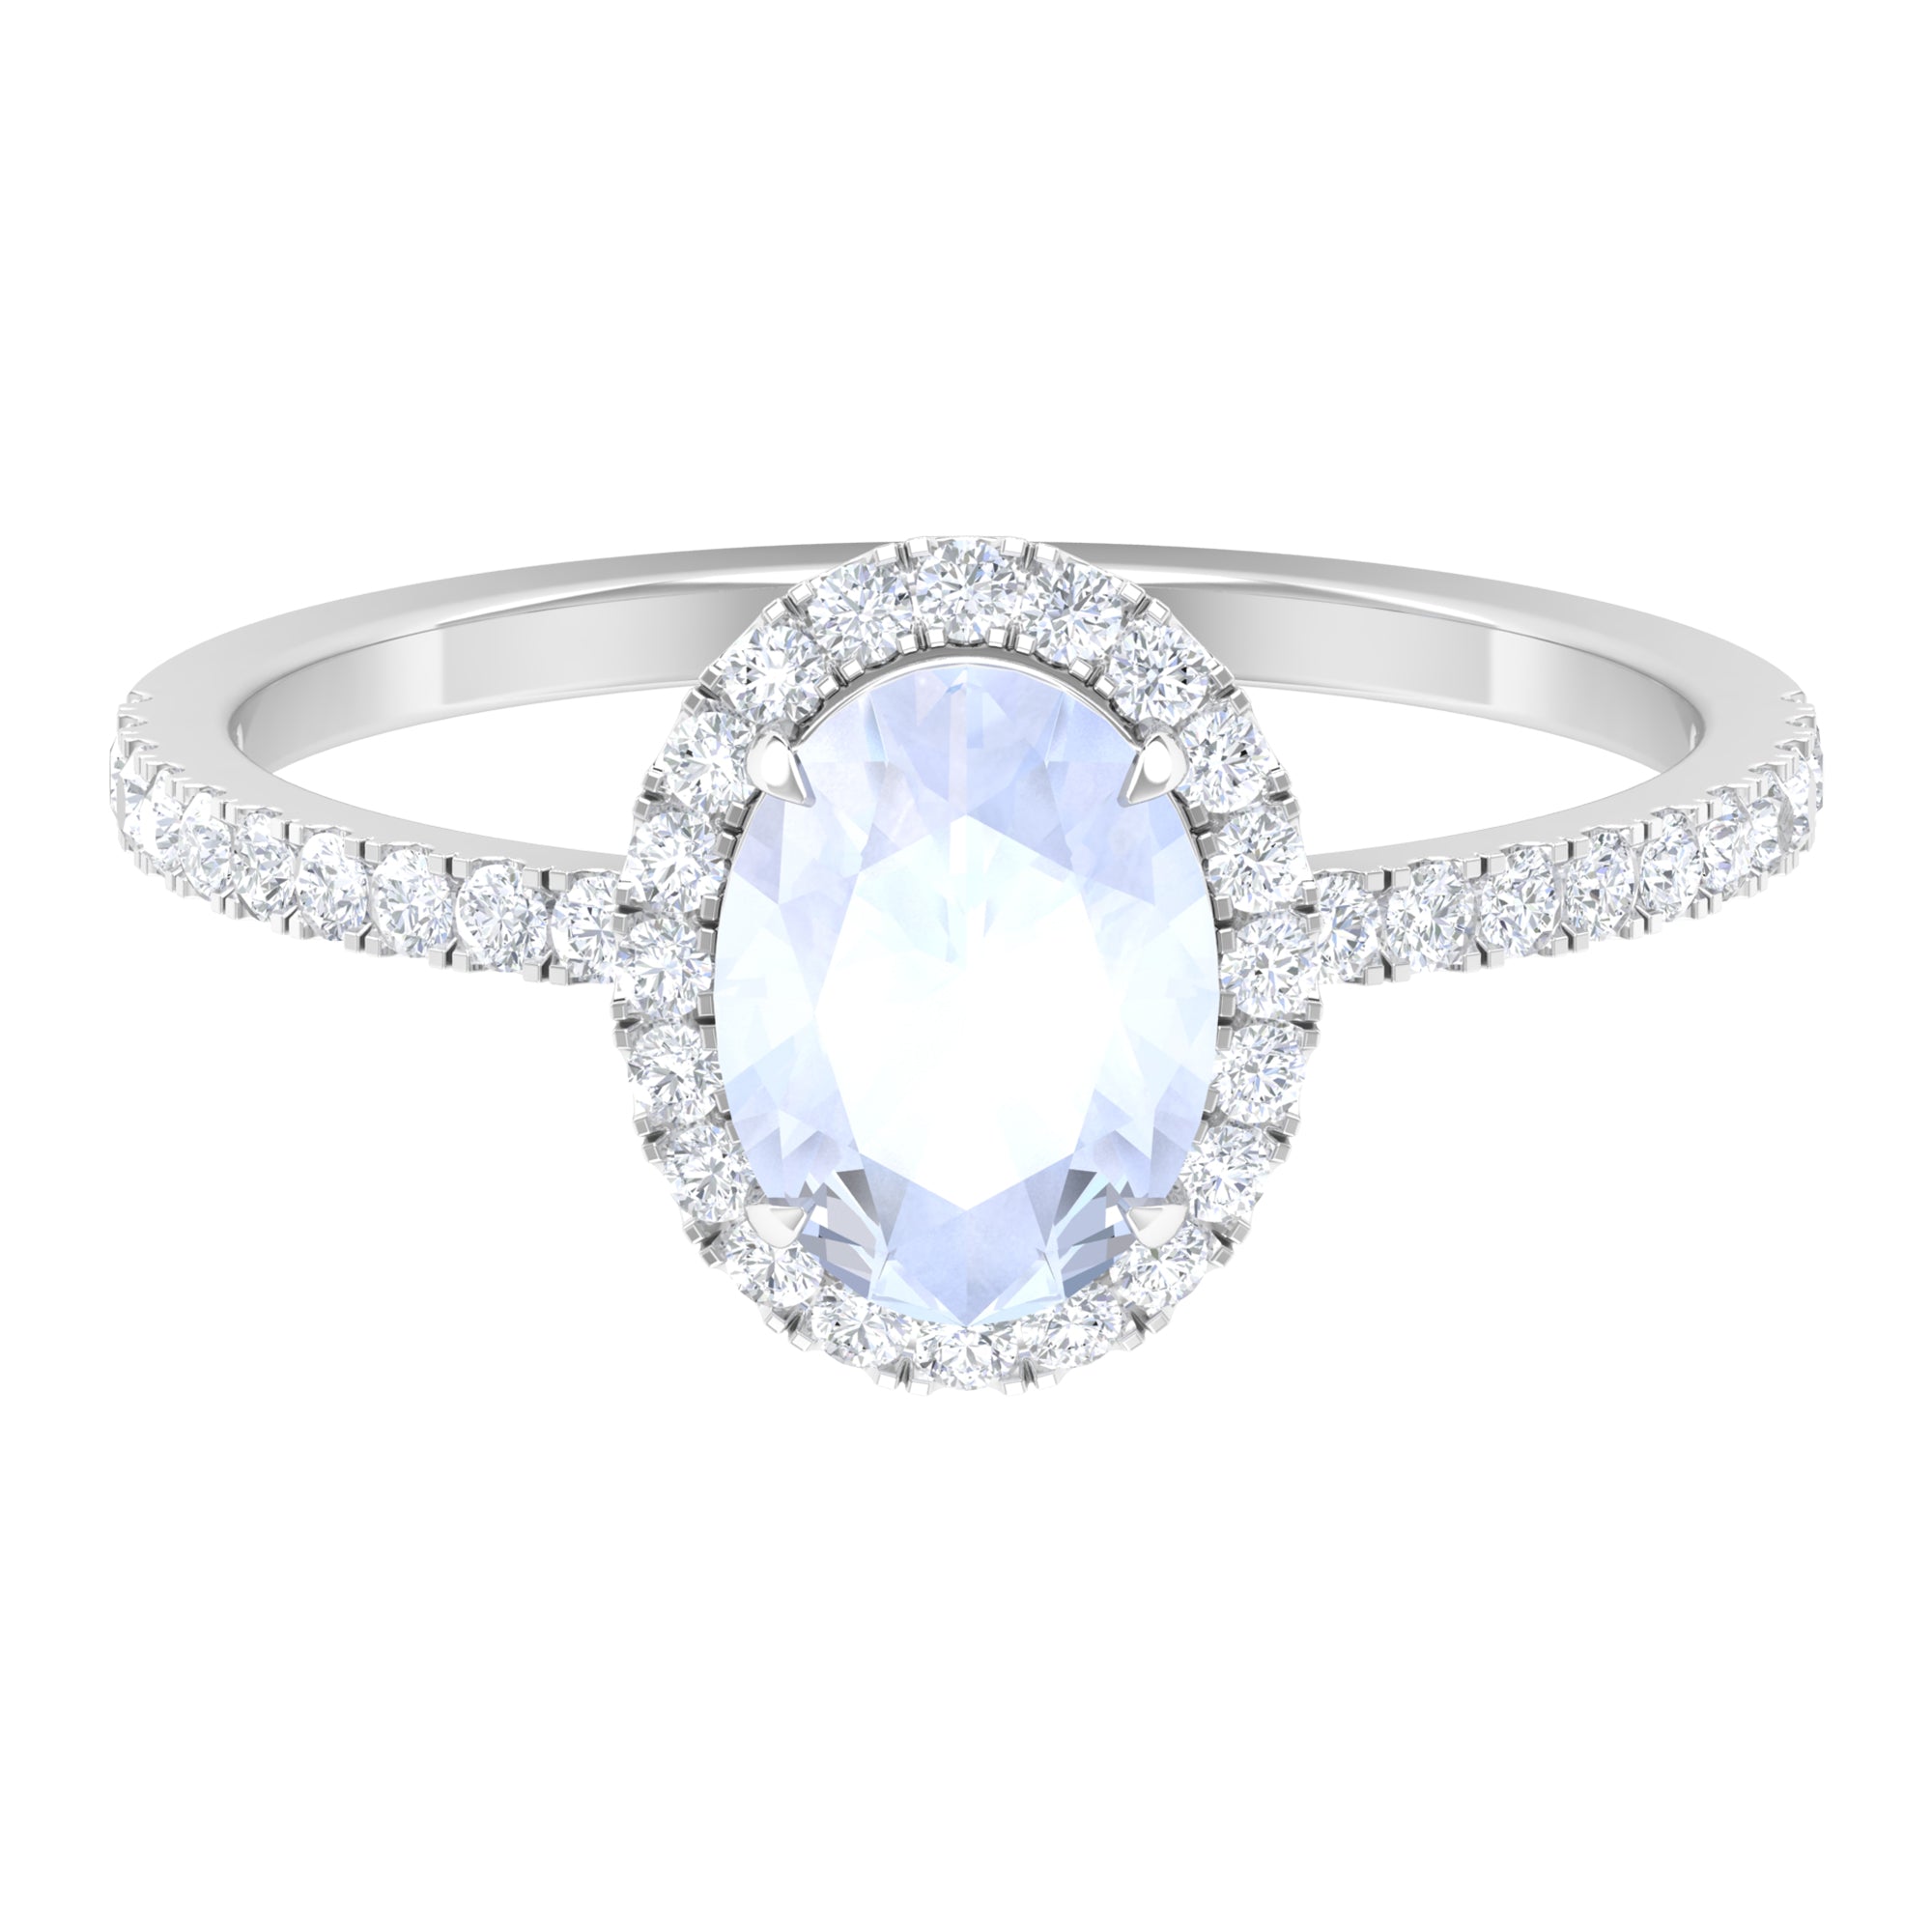 Oval Moonstone Engagement Ring with Diamond Halo